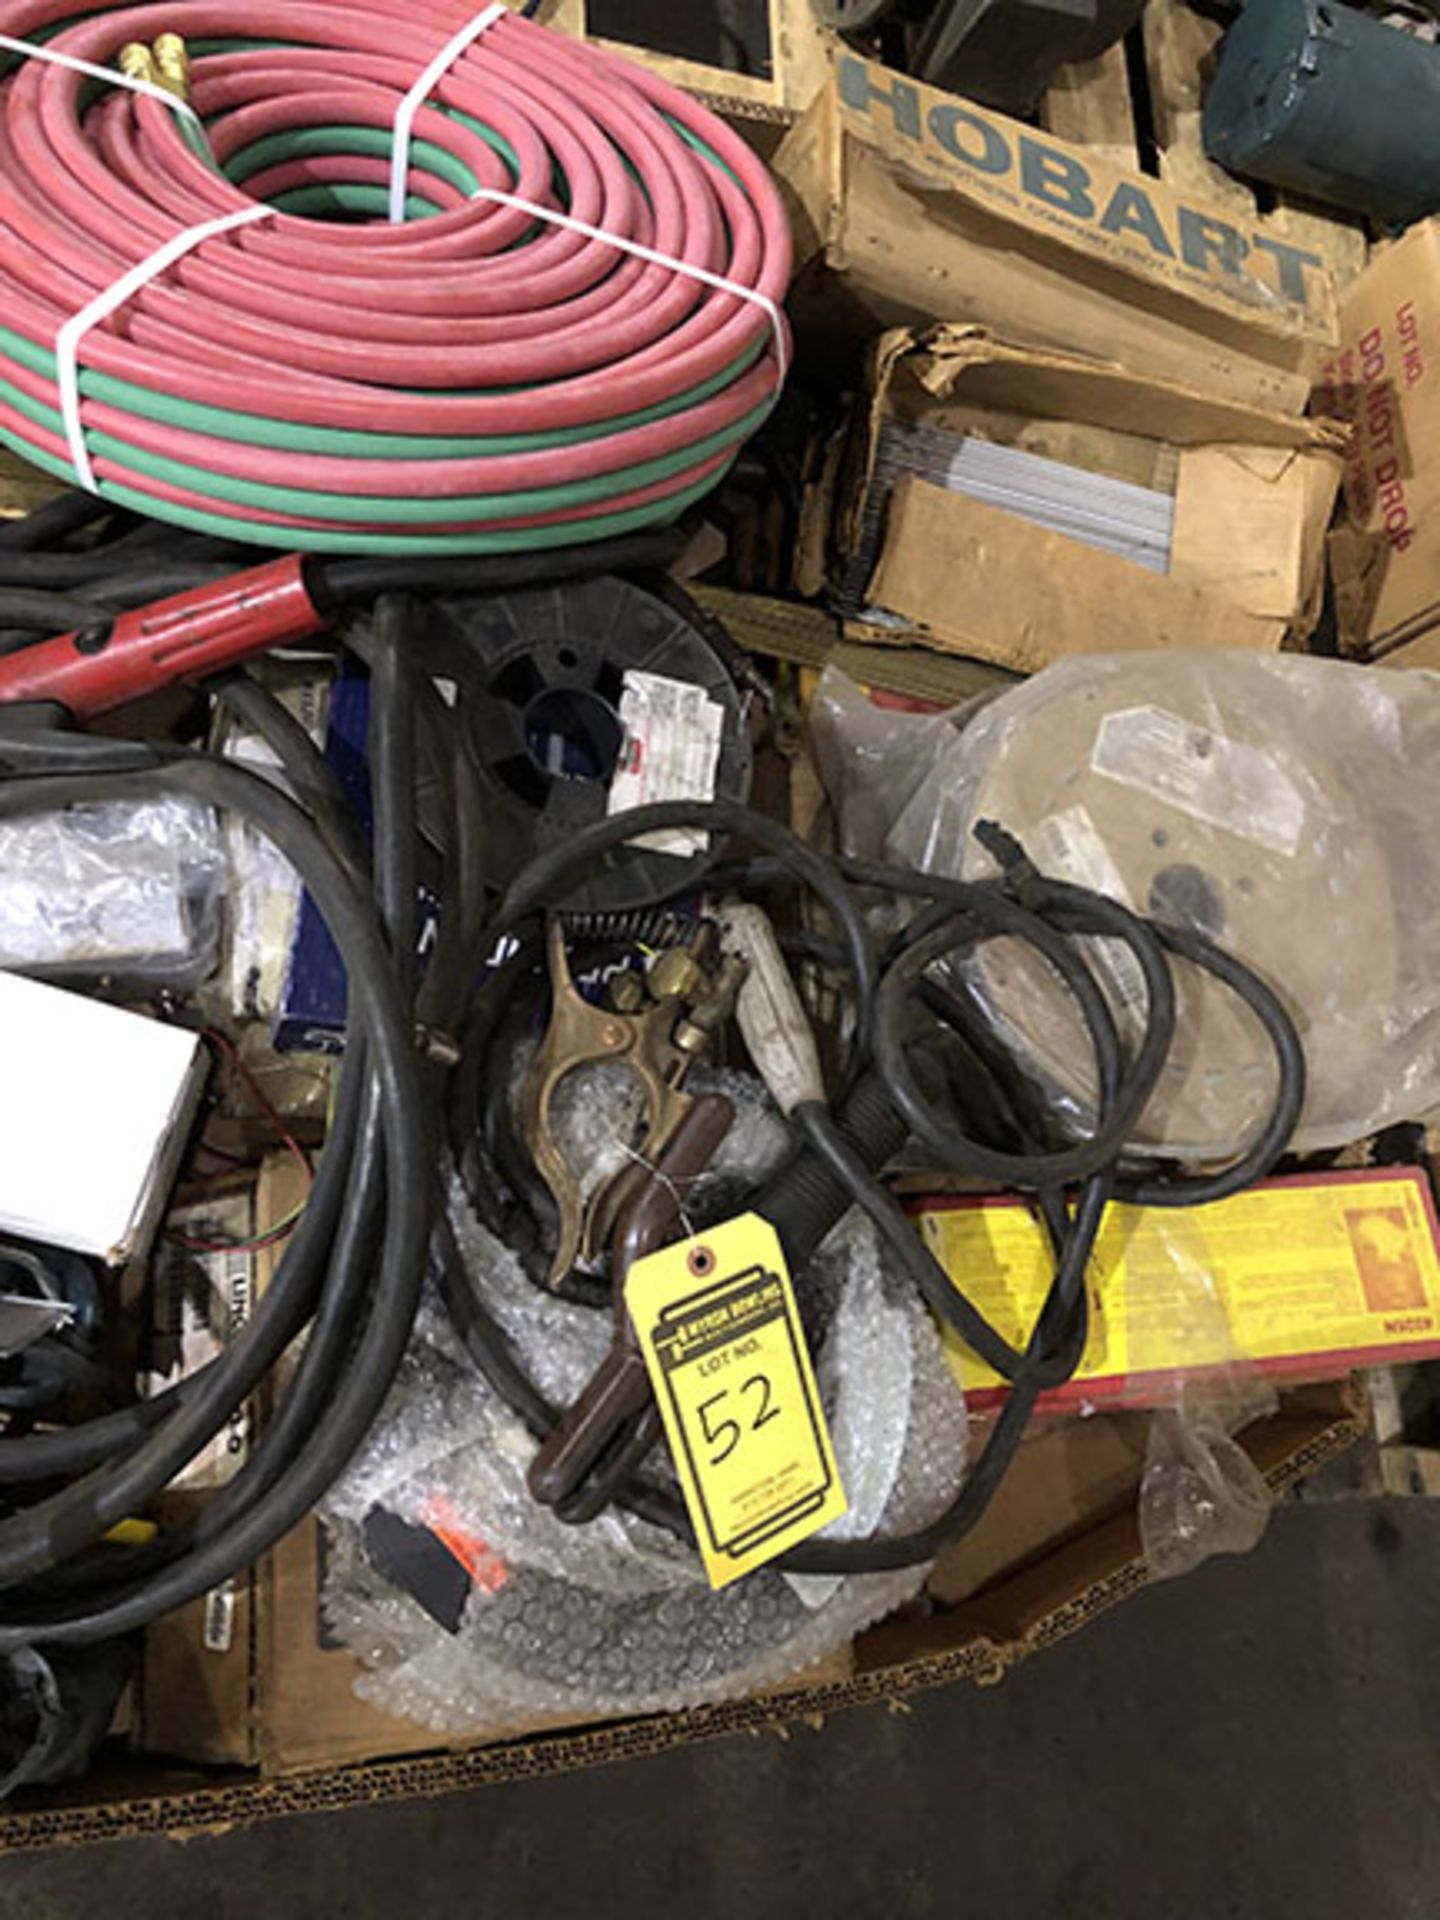 (4) PALLETS OF ASSORTED WELDING WIRE, WELDING RODS, WELDING ROD ELECTRODES, TWIN LINE HOSE, GROUND - Image 4 of 4